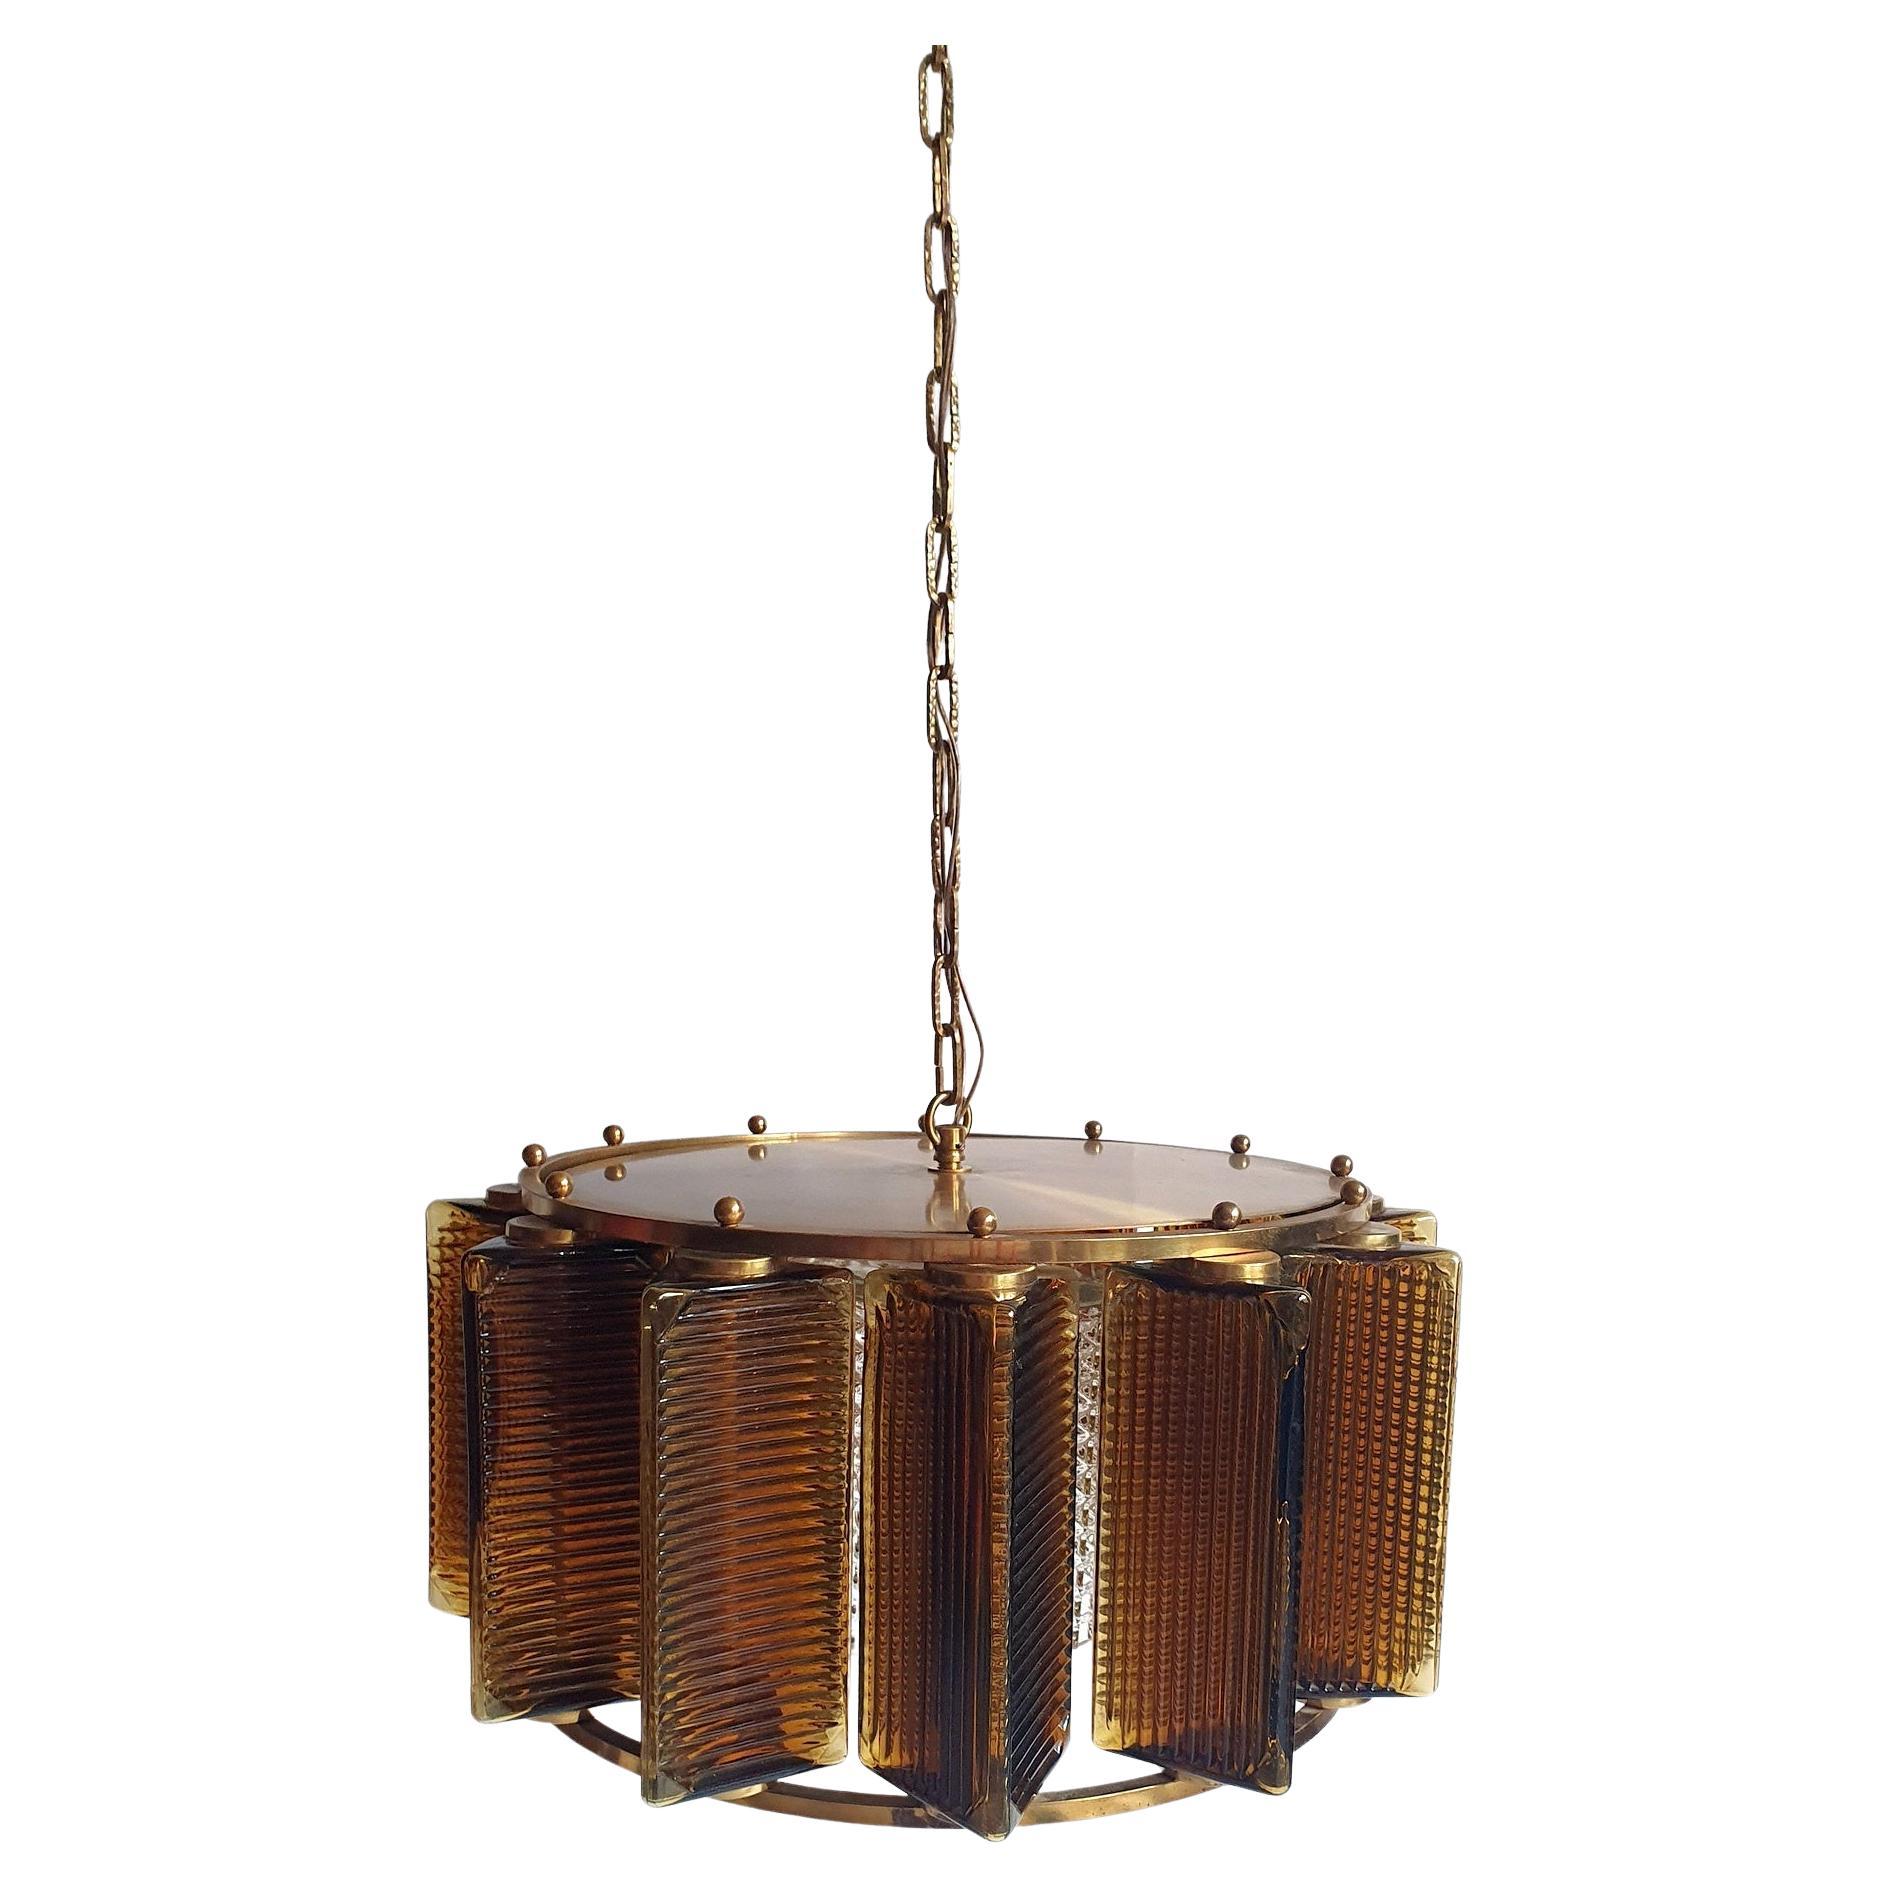 Midcentury Chandelier by Carl Fagerlund  for Orrefors Sweden